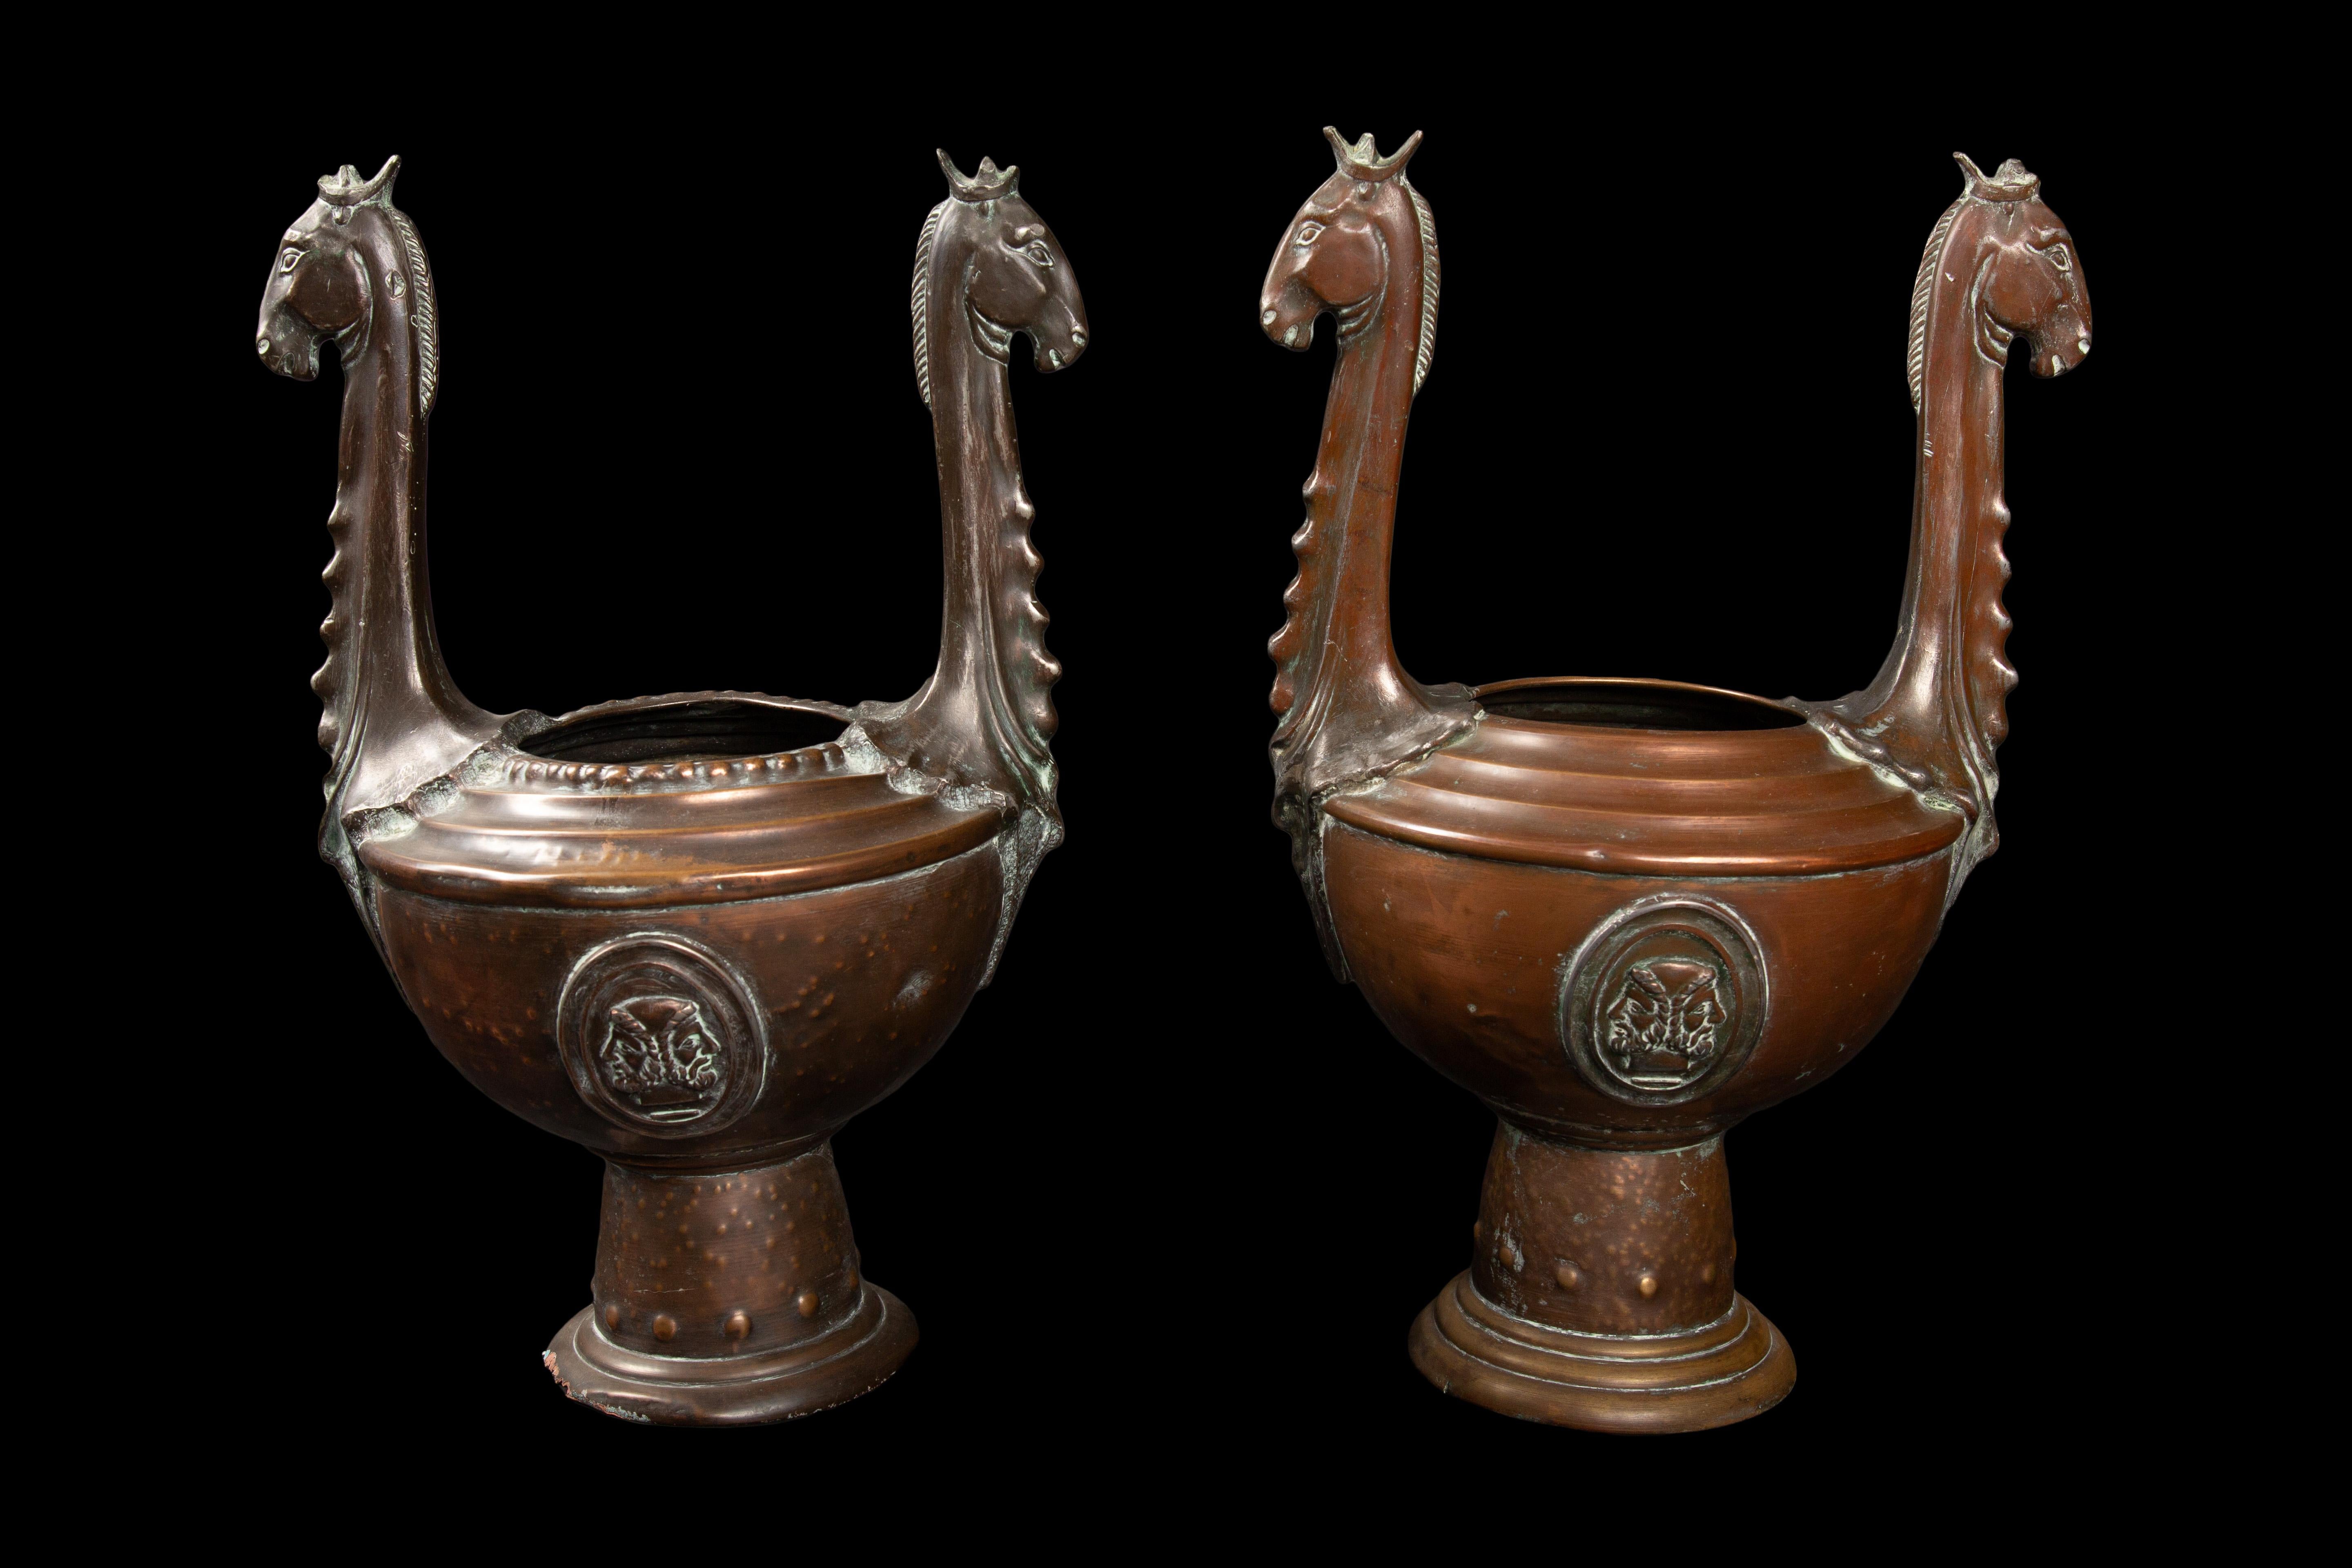 Exquisite pair of 19th Century Copper and Bronze Greek Urns/Vases, reminiscent of the Hellenistic era, adorned with timeless symbols of wisdom and strength. Proudly displayed on each vessel is the revered owl of Athena, a symbol of wisdom and